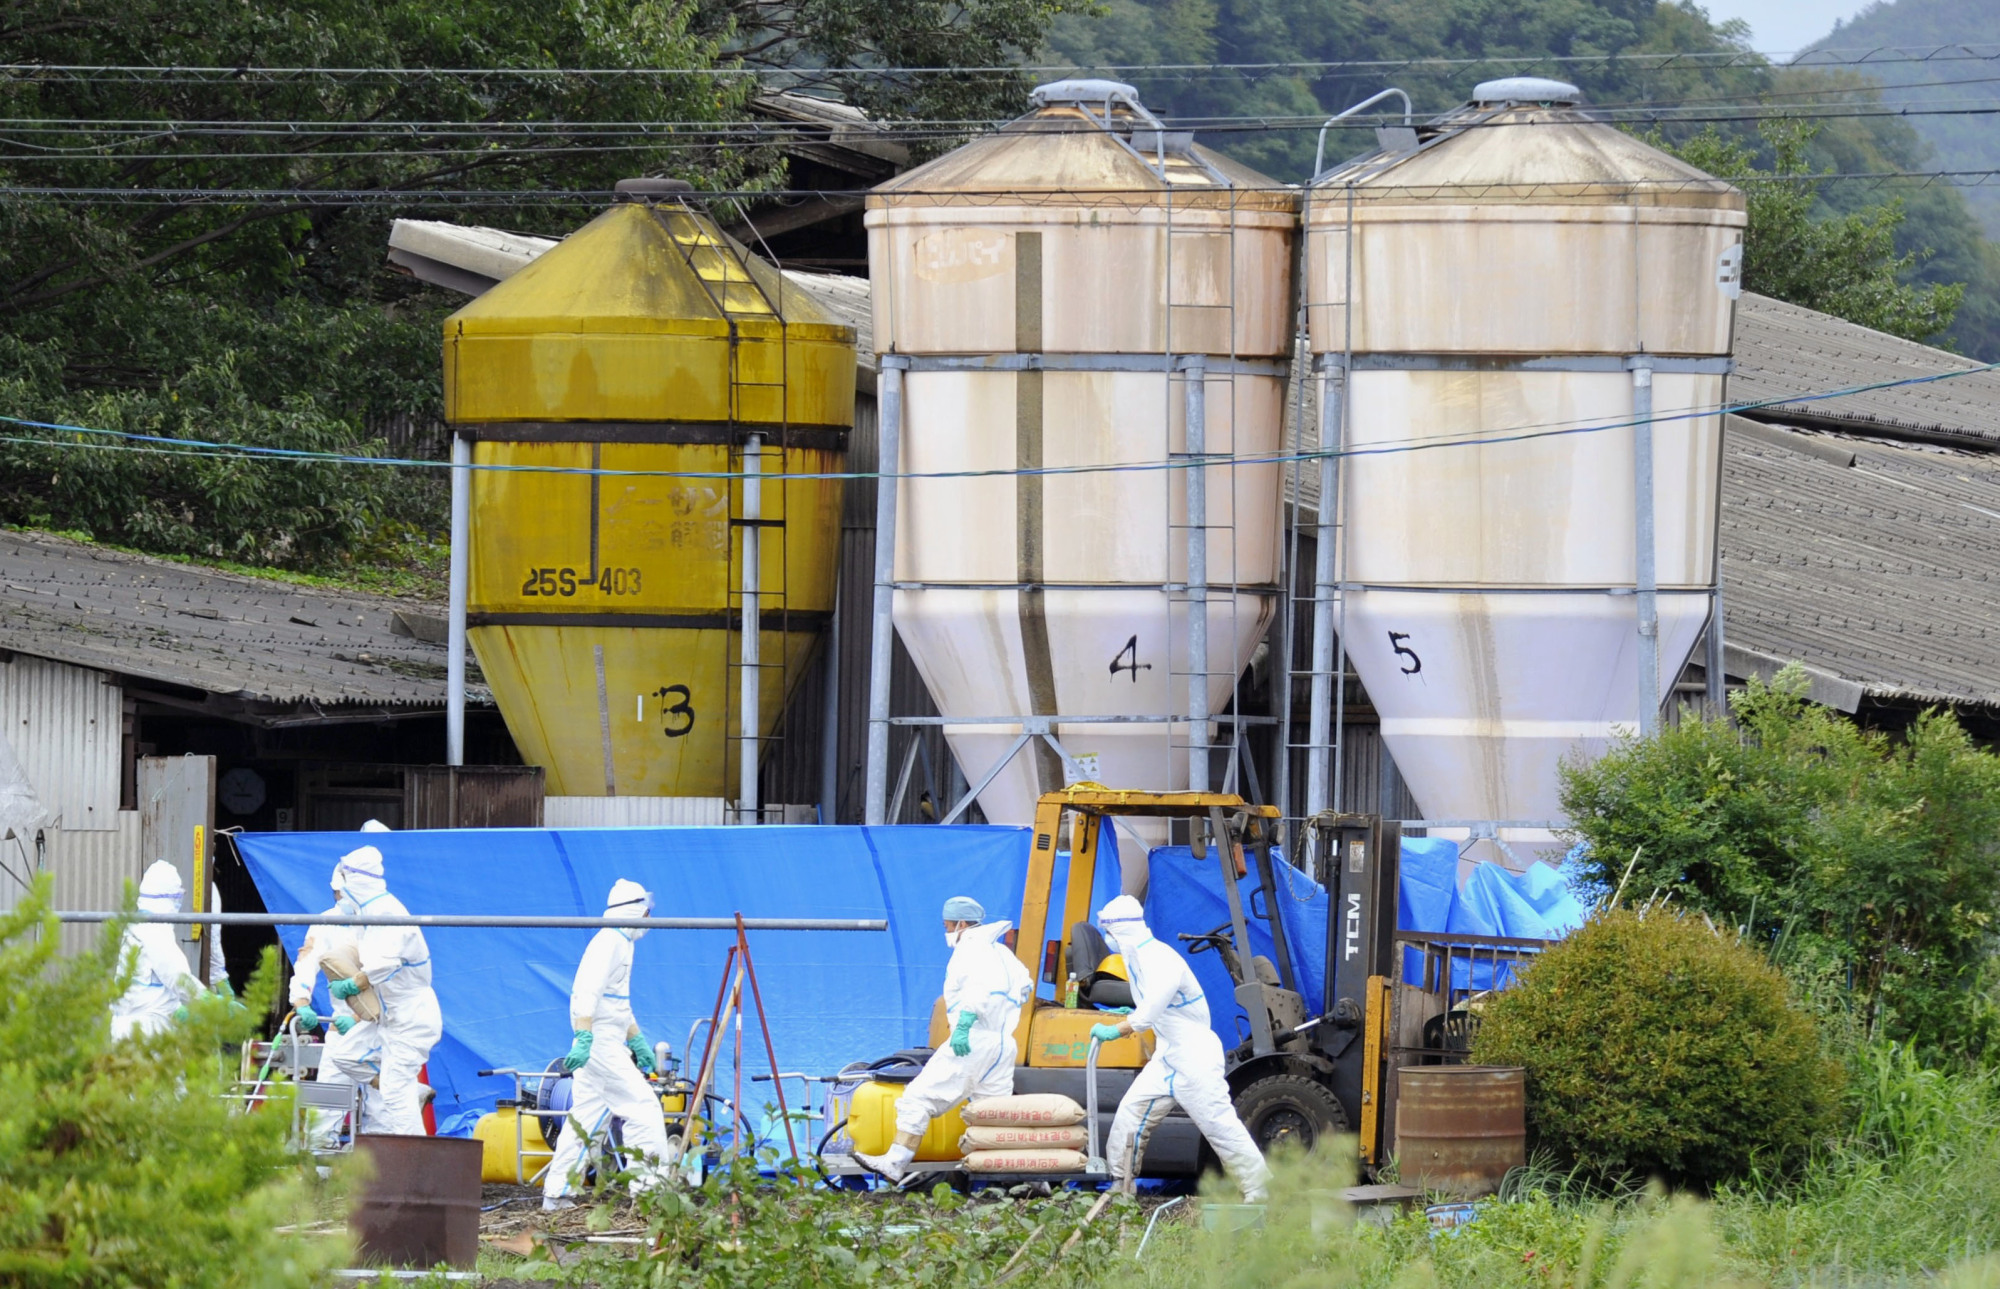 Officials disinfect a farm in the city of Gifu on Sunday after a pig that died there was confirmed as having swine fever. | KYODO